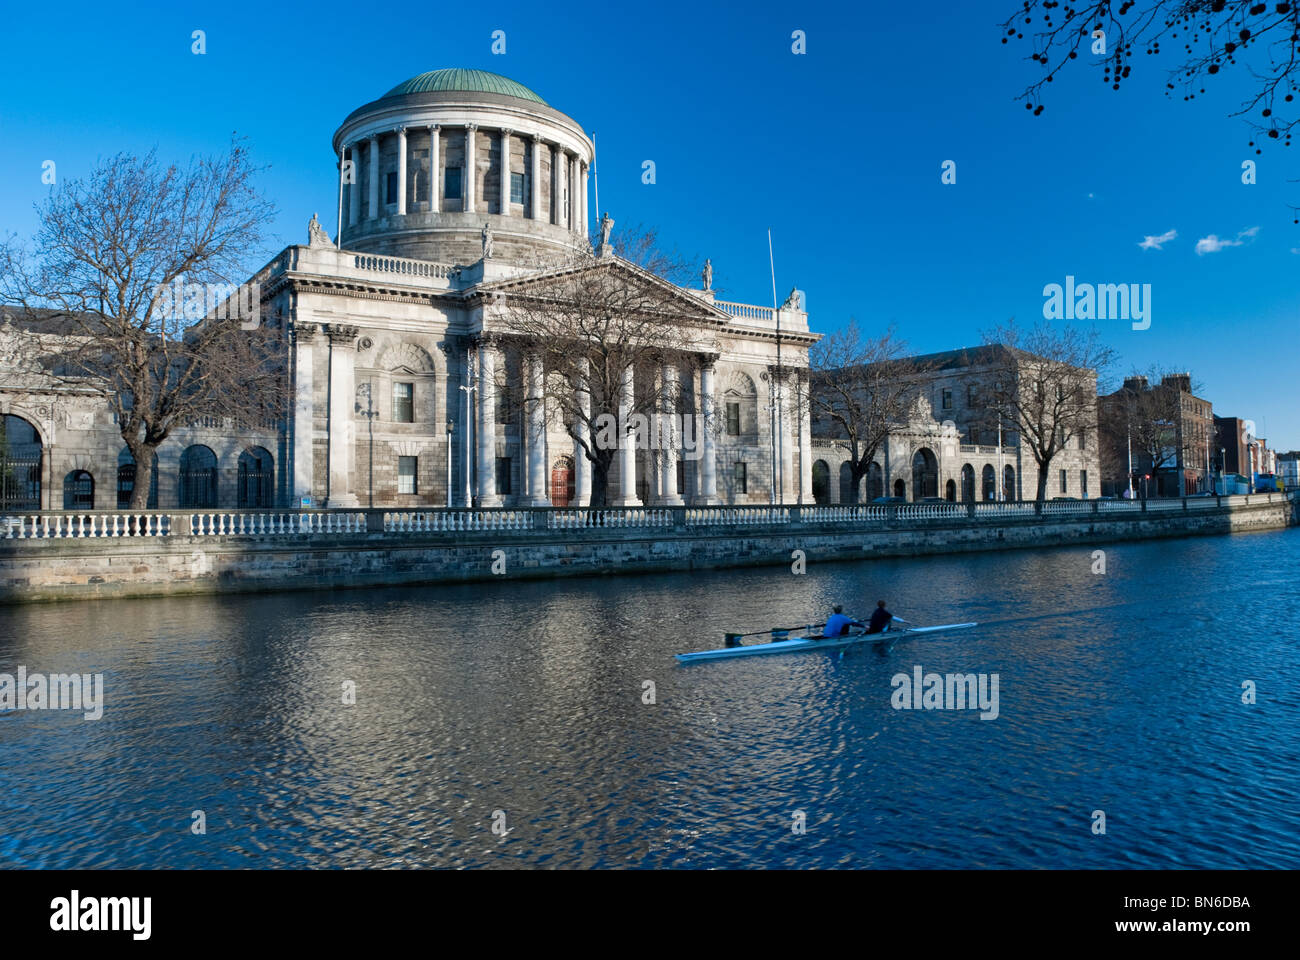 Early morning rowers passing by the Four Courts, the location of the Supreme and High Court of Ireland. Stock Photo